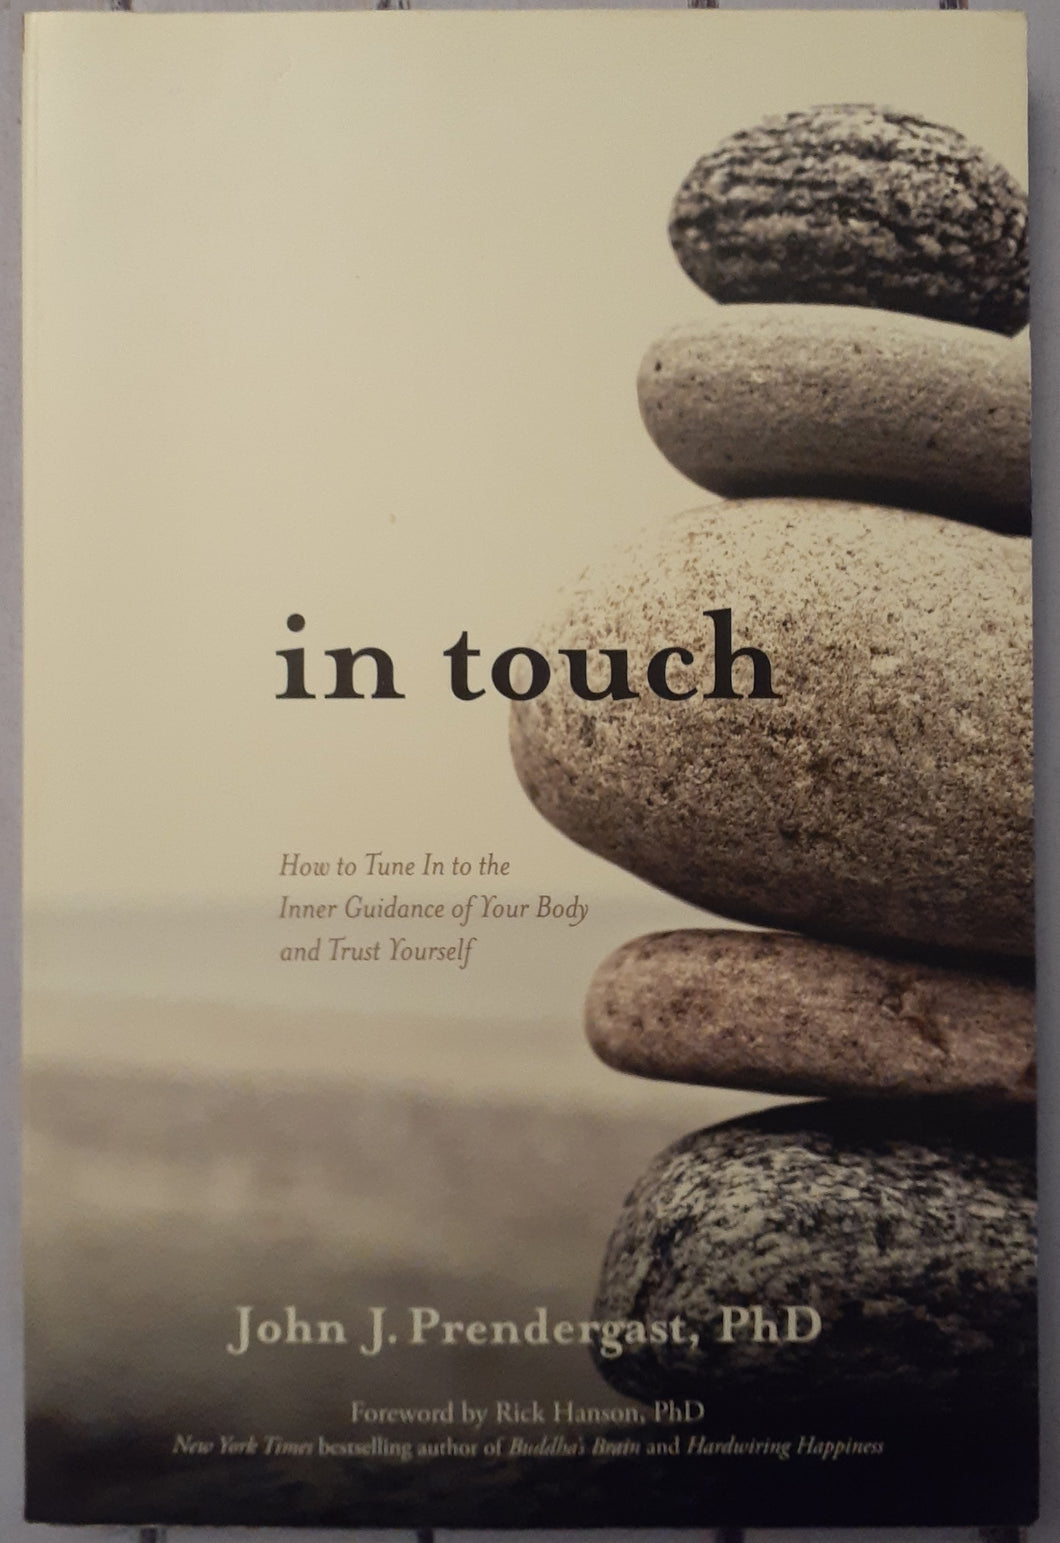 In Touch: How to Tune In to the Inner Guidance of Your Body and Trust Yourself